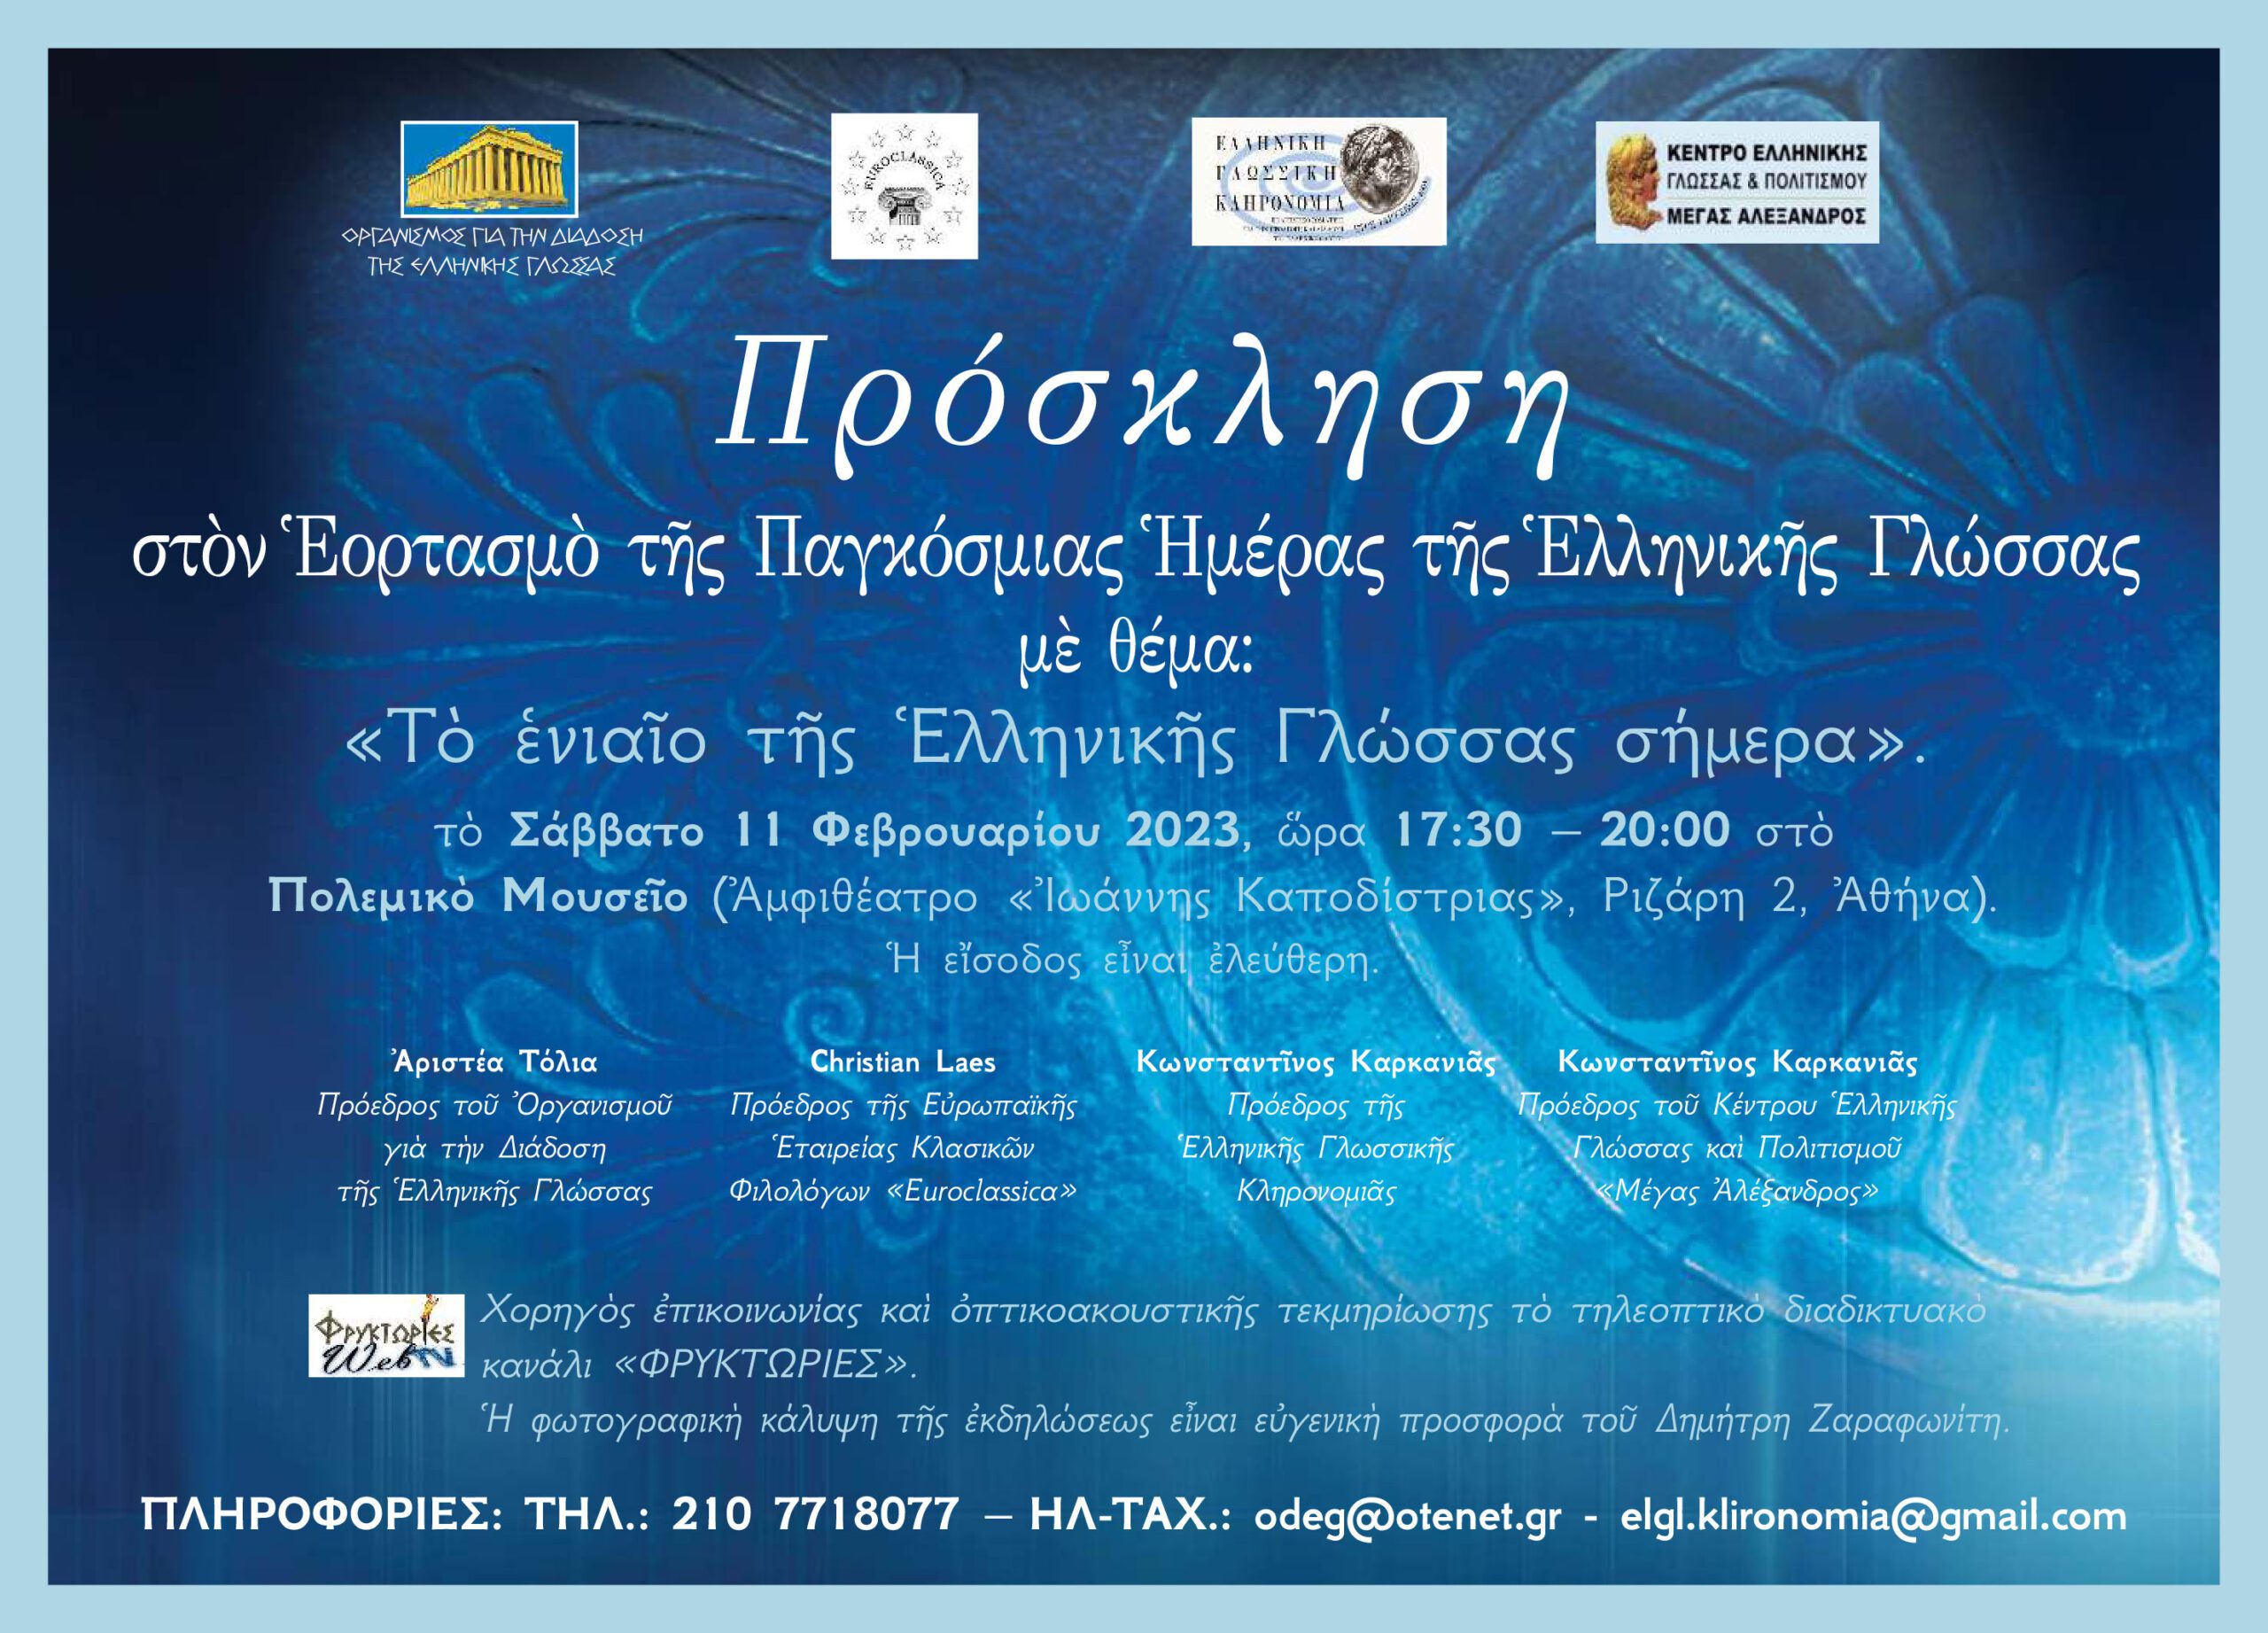 You are currently viewing FEBRUARY 9, THE INTERNATIONAL DAY OF GREEK LANGUAGE